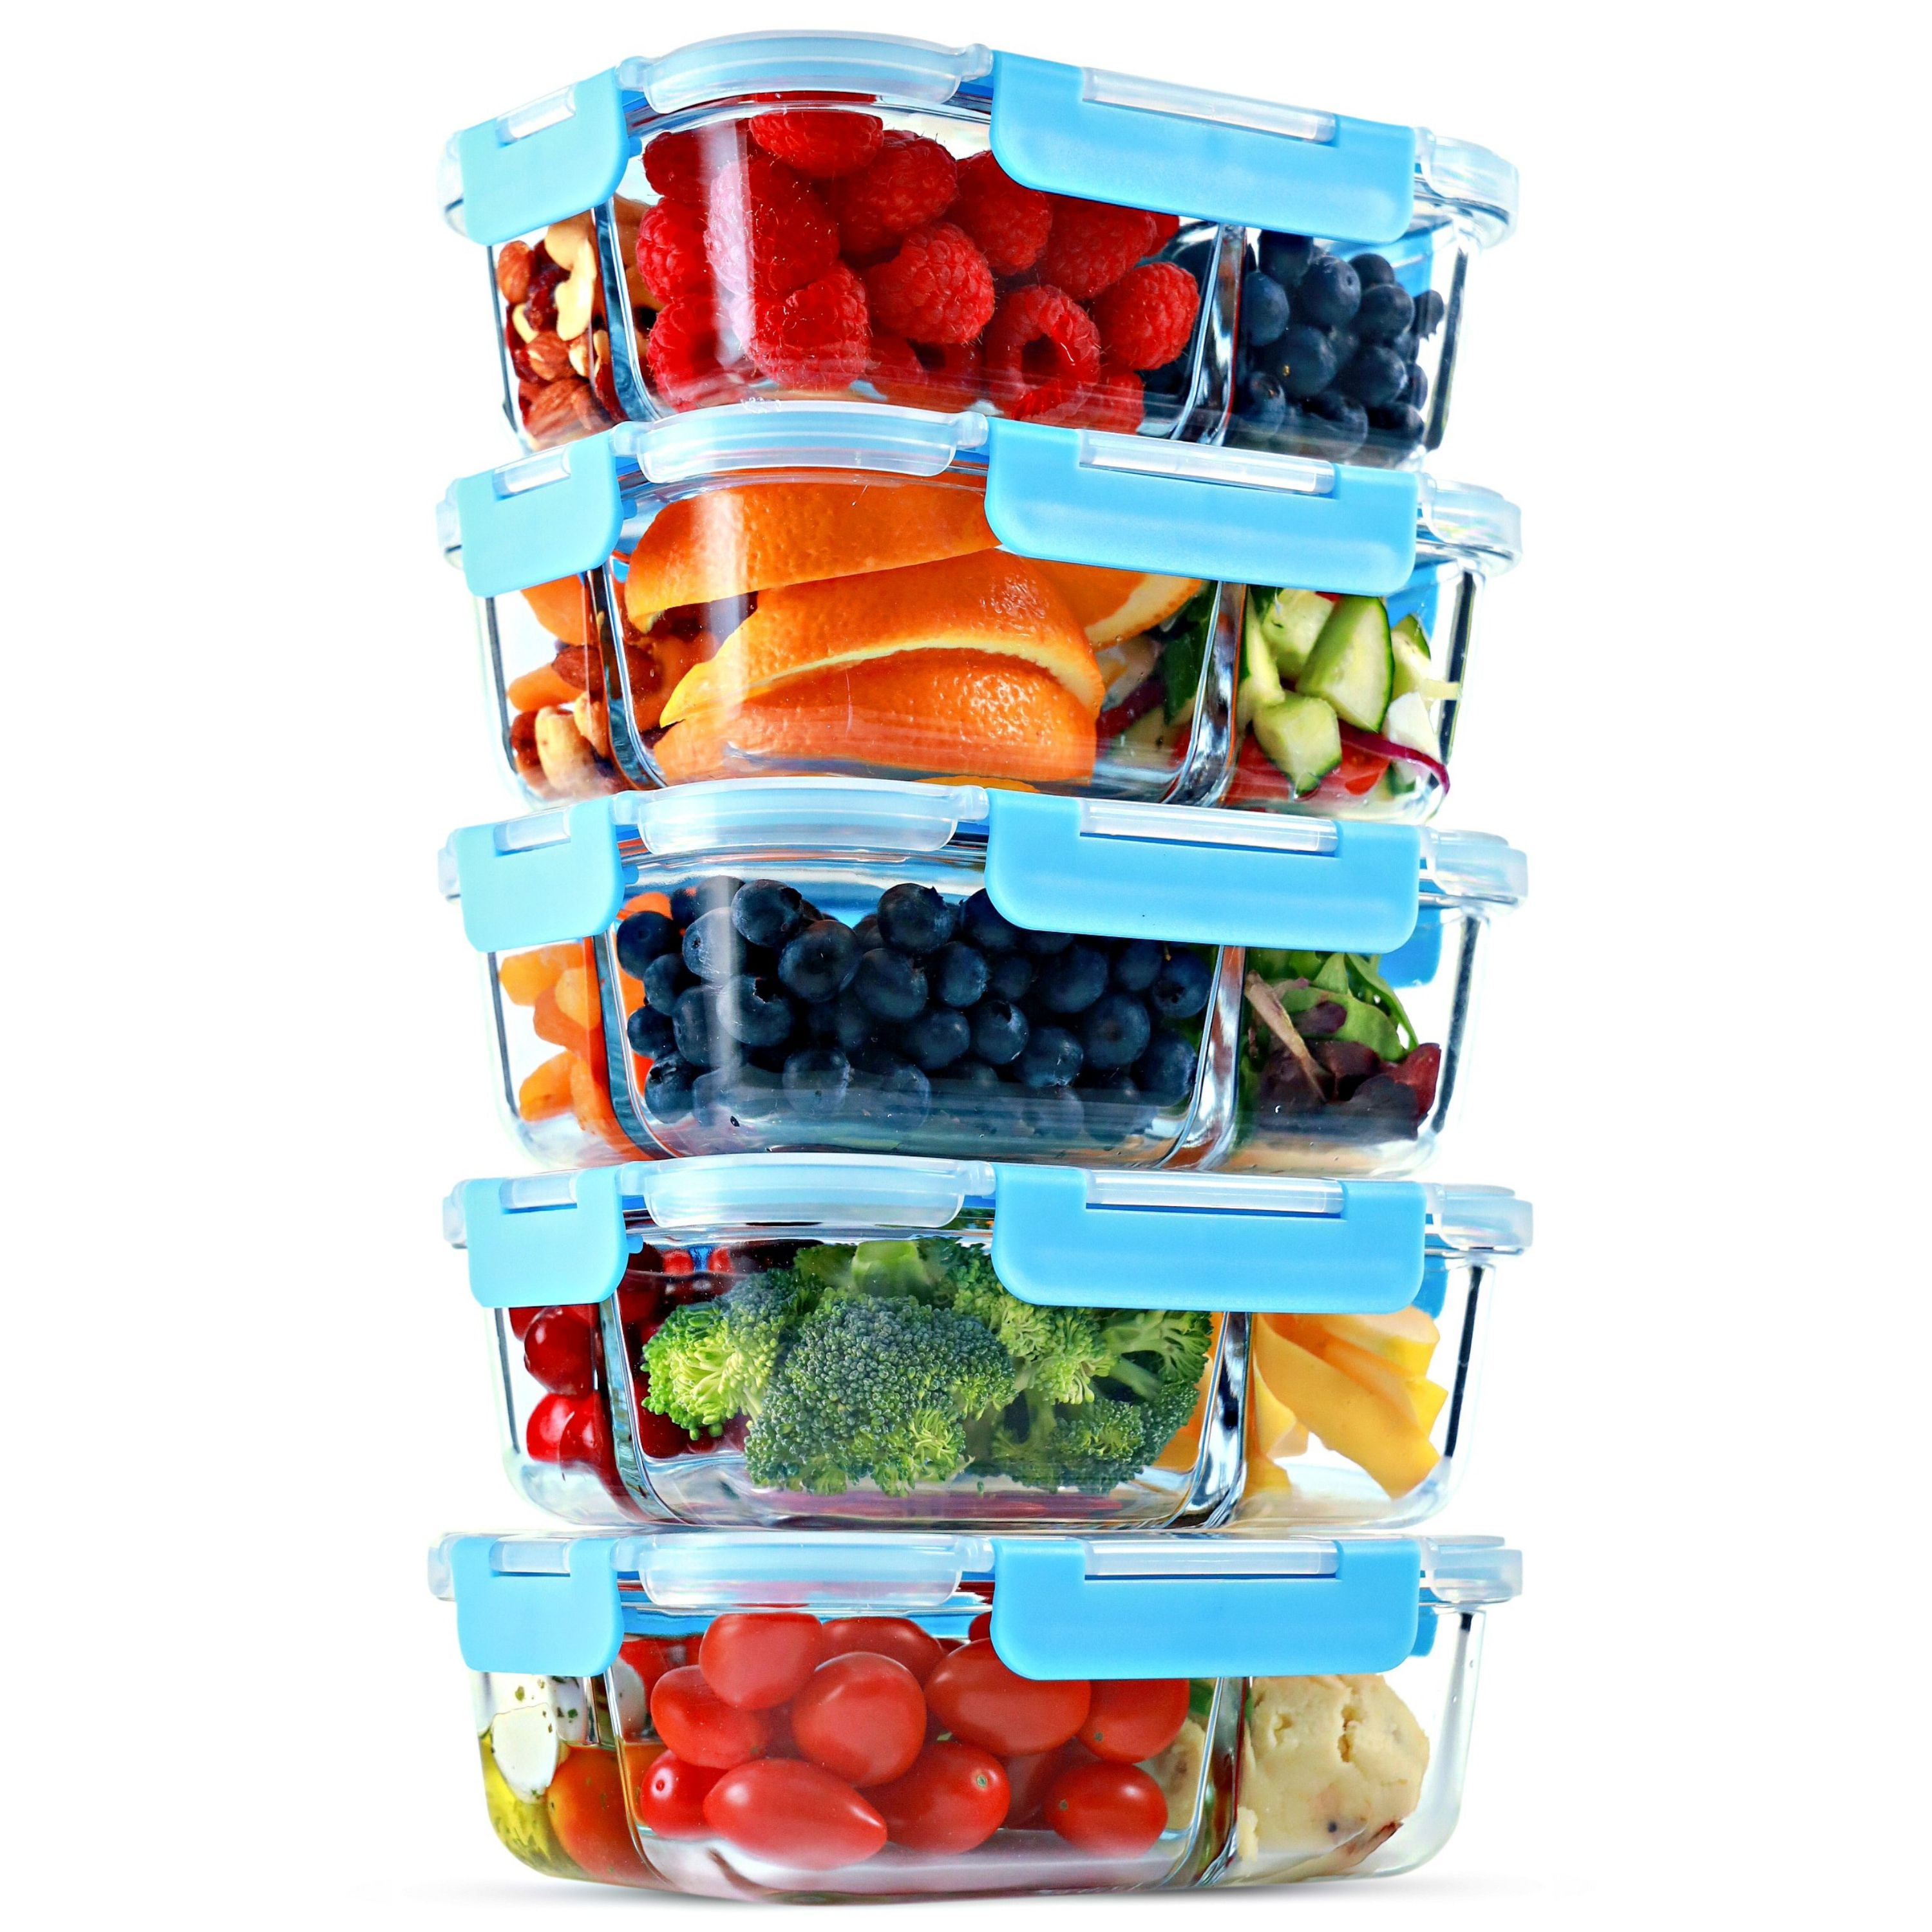  CZUMJJ Glass Meal Prep Containers 2 Compartment with Lids (5  Pack, 34oz), Divided Glass Storage Containers for Lunch at Work, Leak-Proof  Portion Control Food Containers, Microwave/Dishwasher Safe: Home & Kitchen